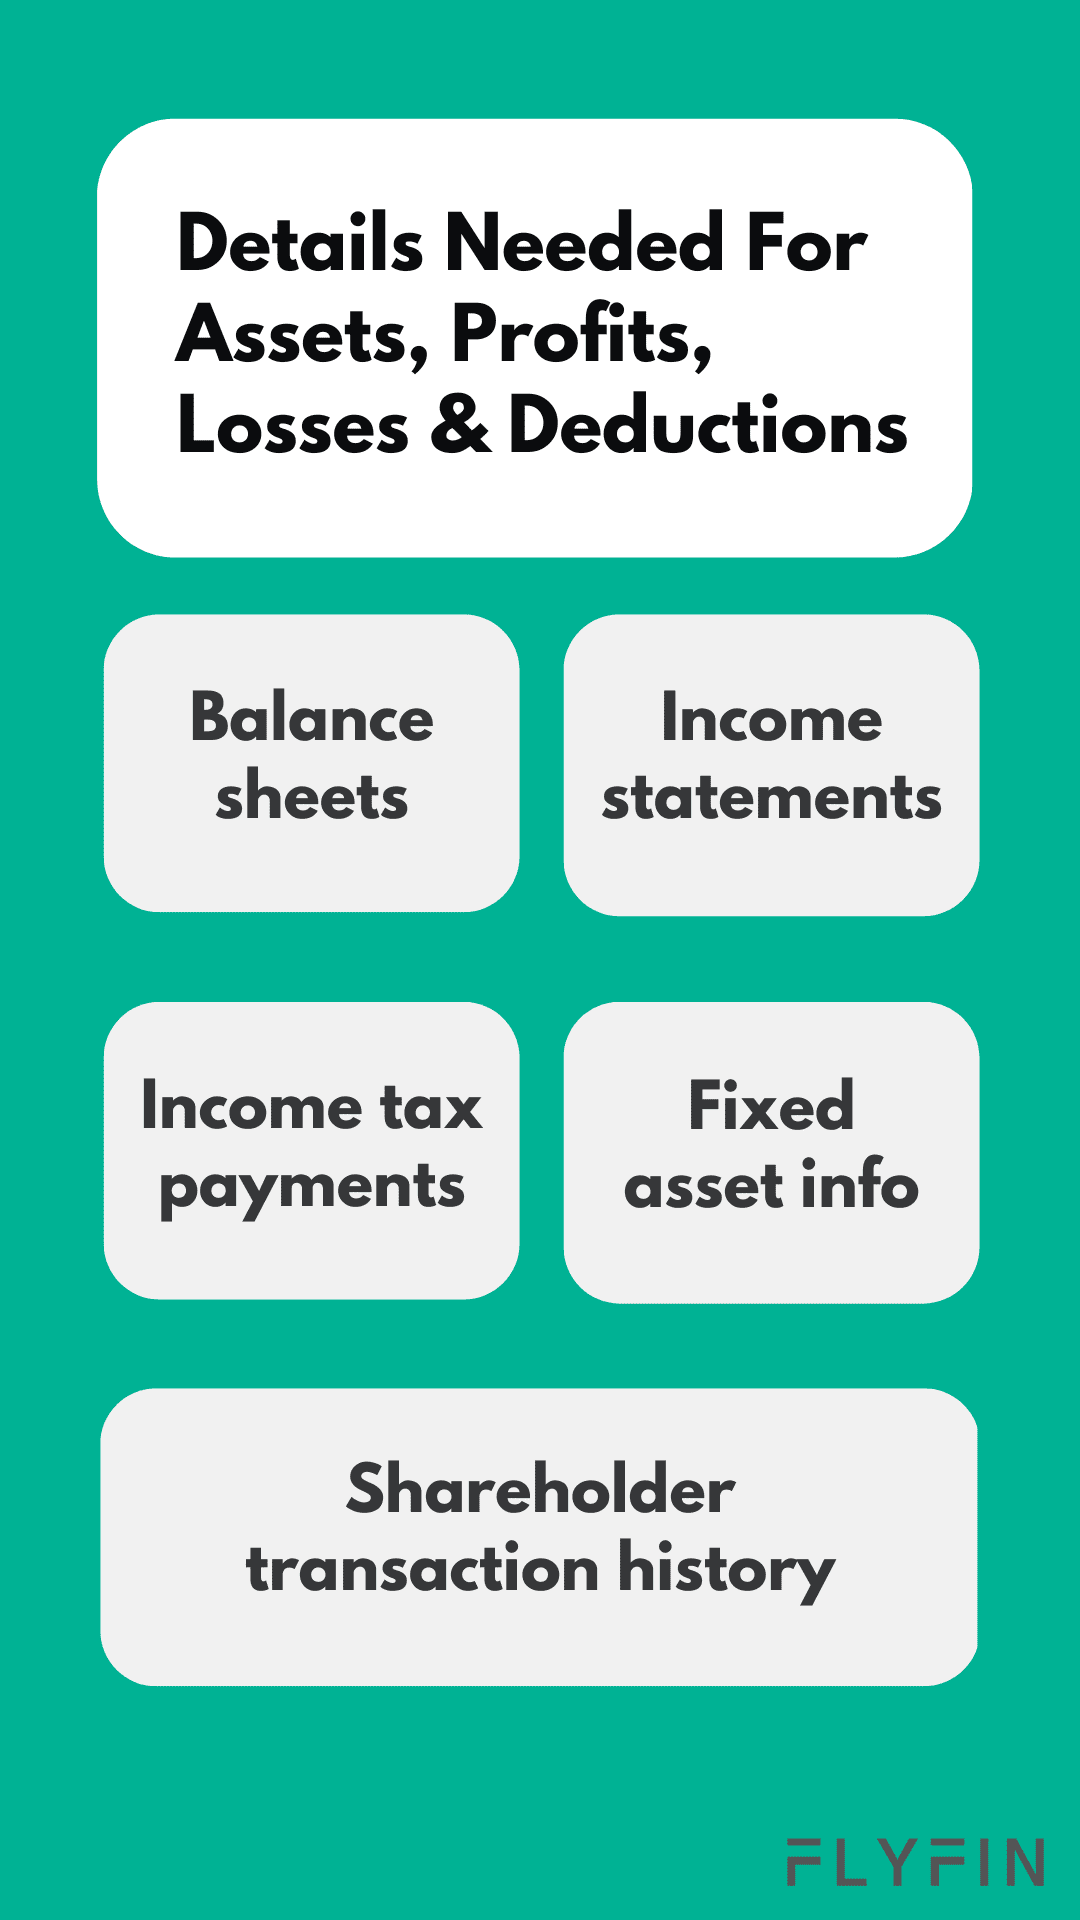 Image with text about financial statements, taxes, assets, and shareholder transactions. Includes details for income, losses, and deductions. Relevant for self-employed, 1099, and freelancer. FLY FIN.